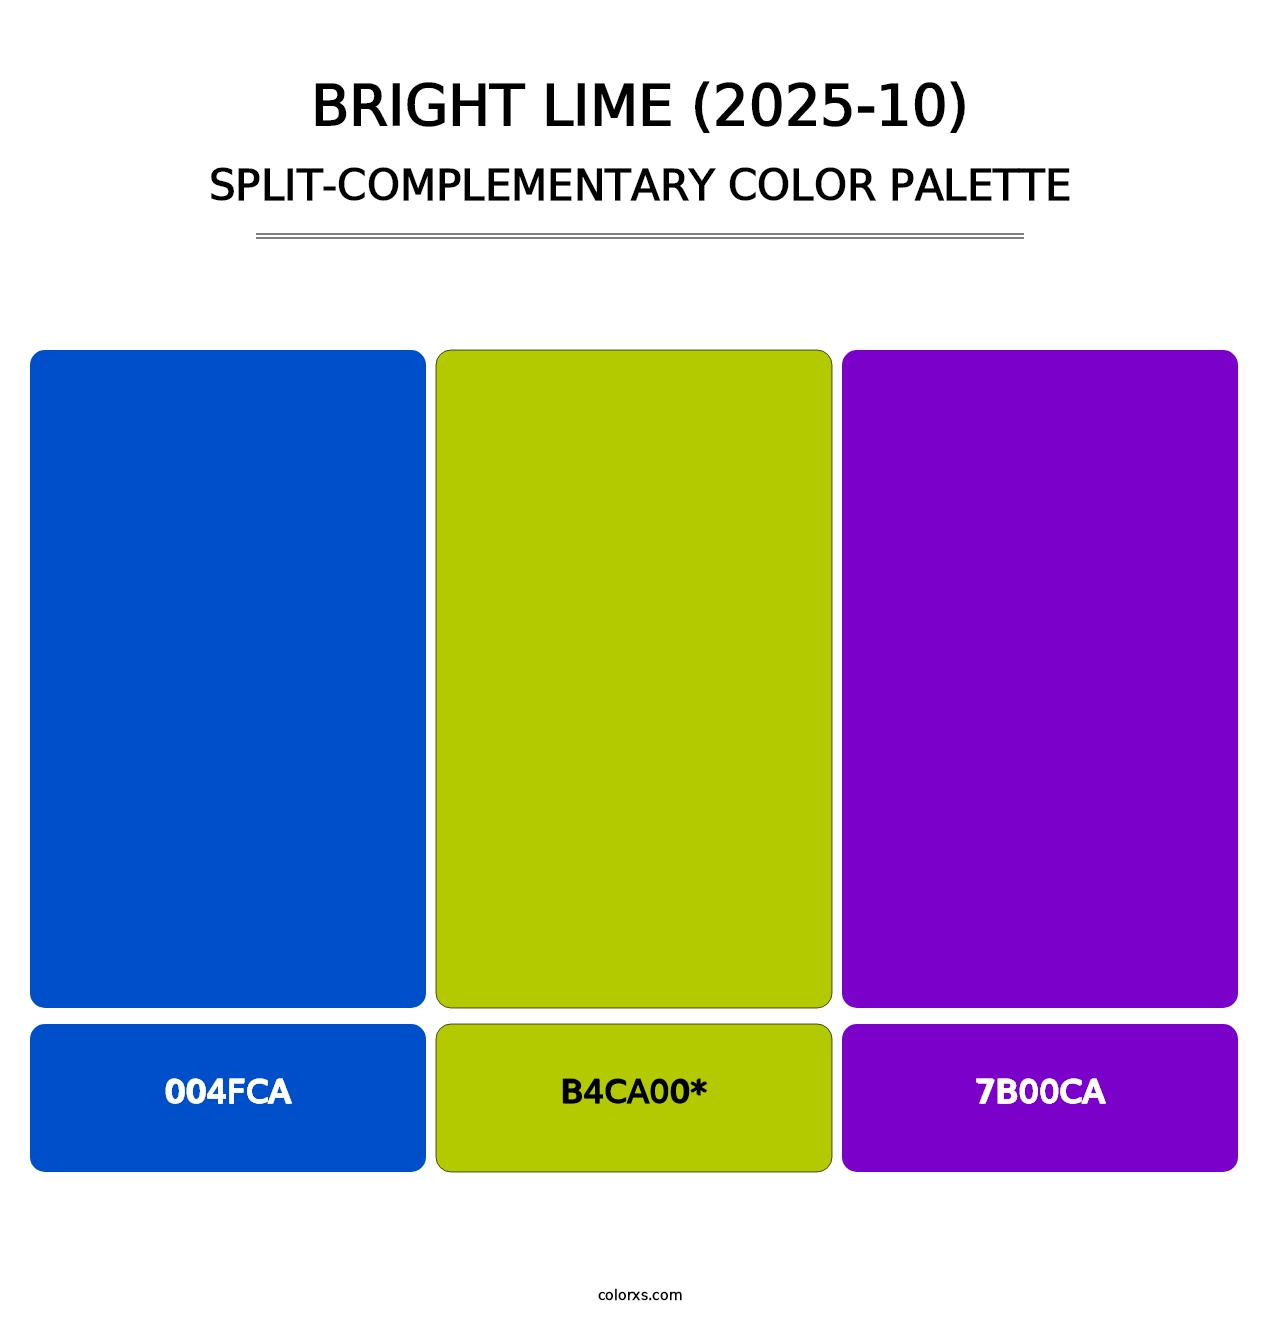 Bright Lime (2025-10) - Split-Complementary Color Palette